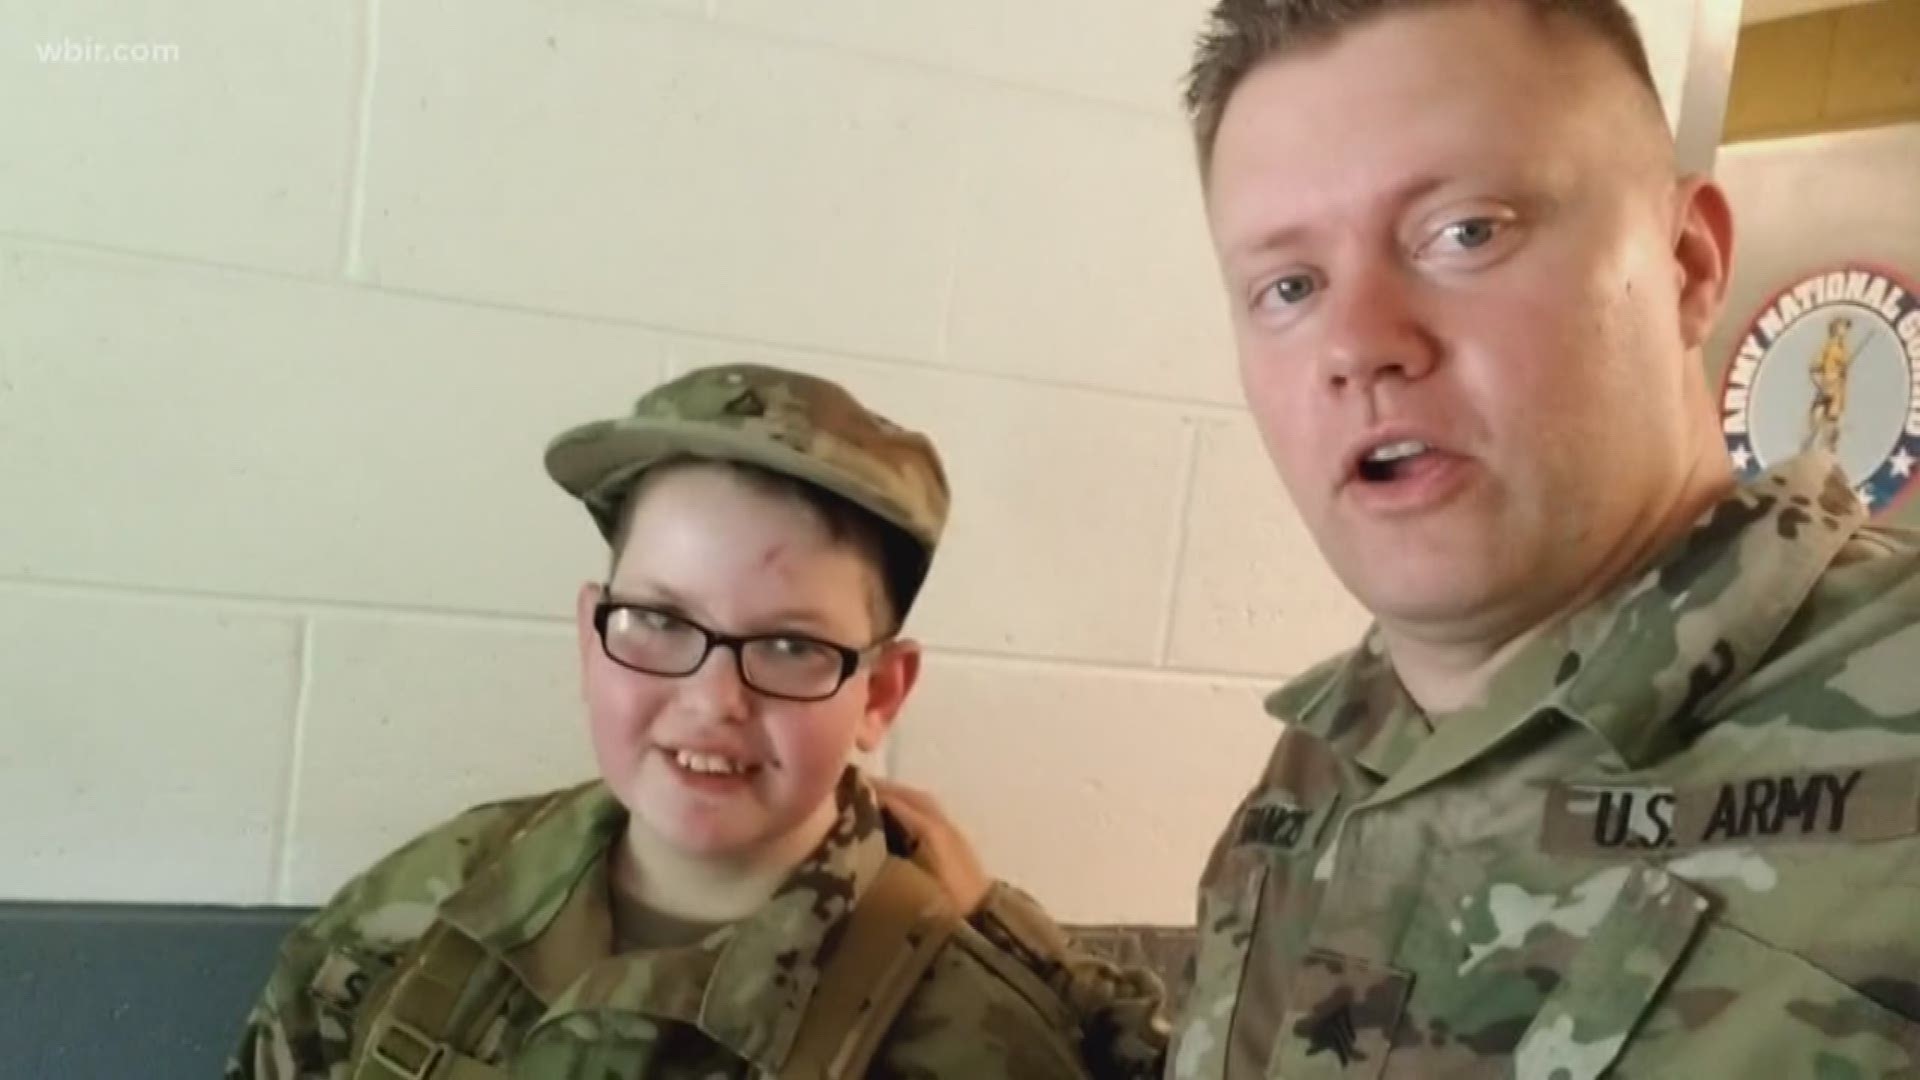 Ashton Settle, 13, has Prader-Willi Syndrome and always wanted to serve in the National Guard. A recruiter friend and a Rockwood unit made his dream came true.